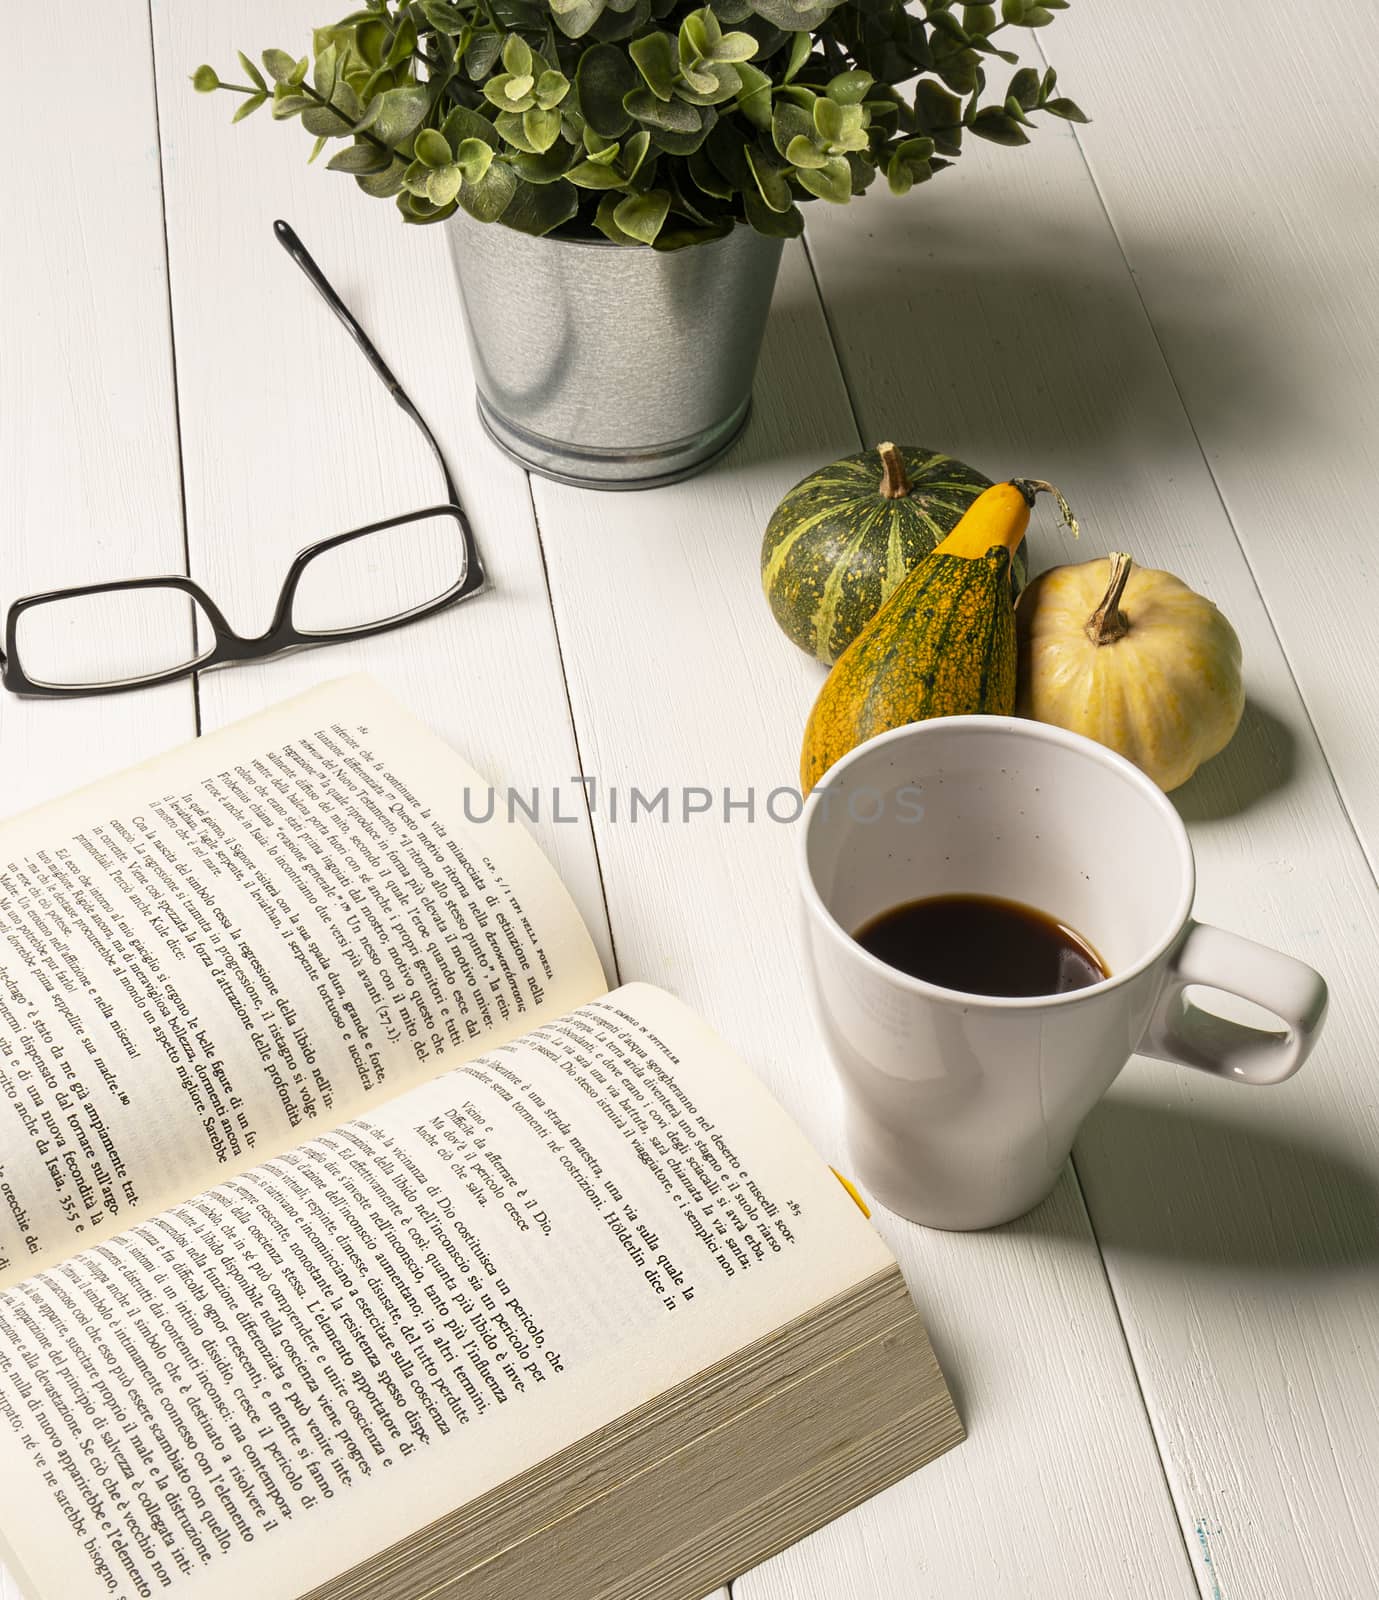 A book open on a white wooden table with a coffee cup